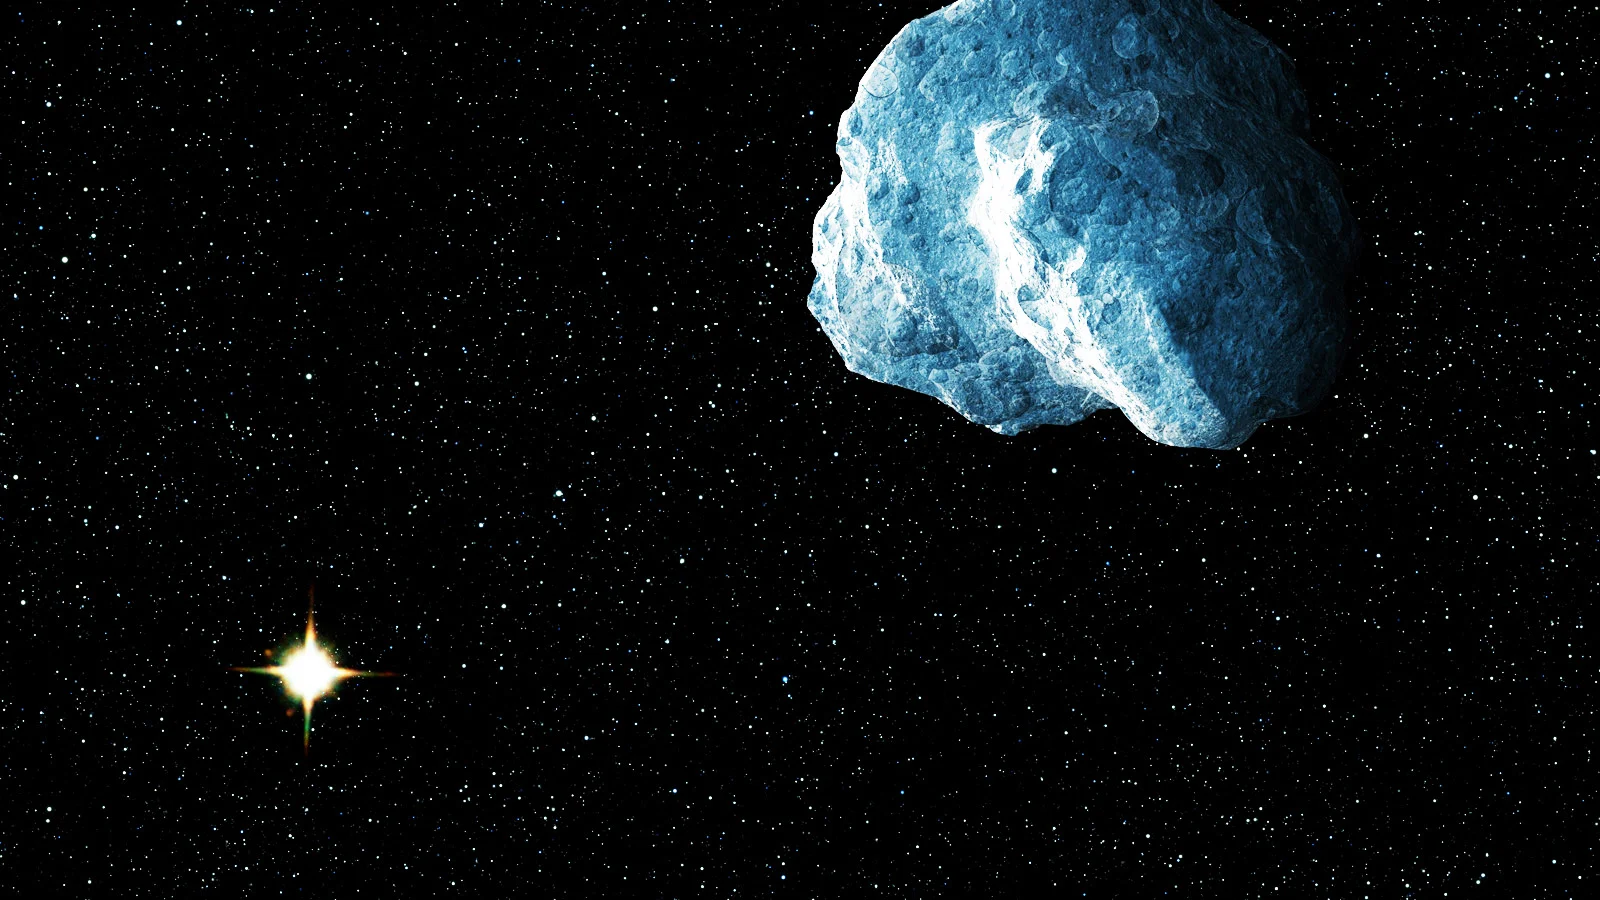 A giant 'mega-comet' is diving through our solar system